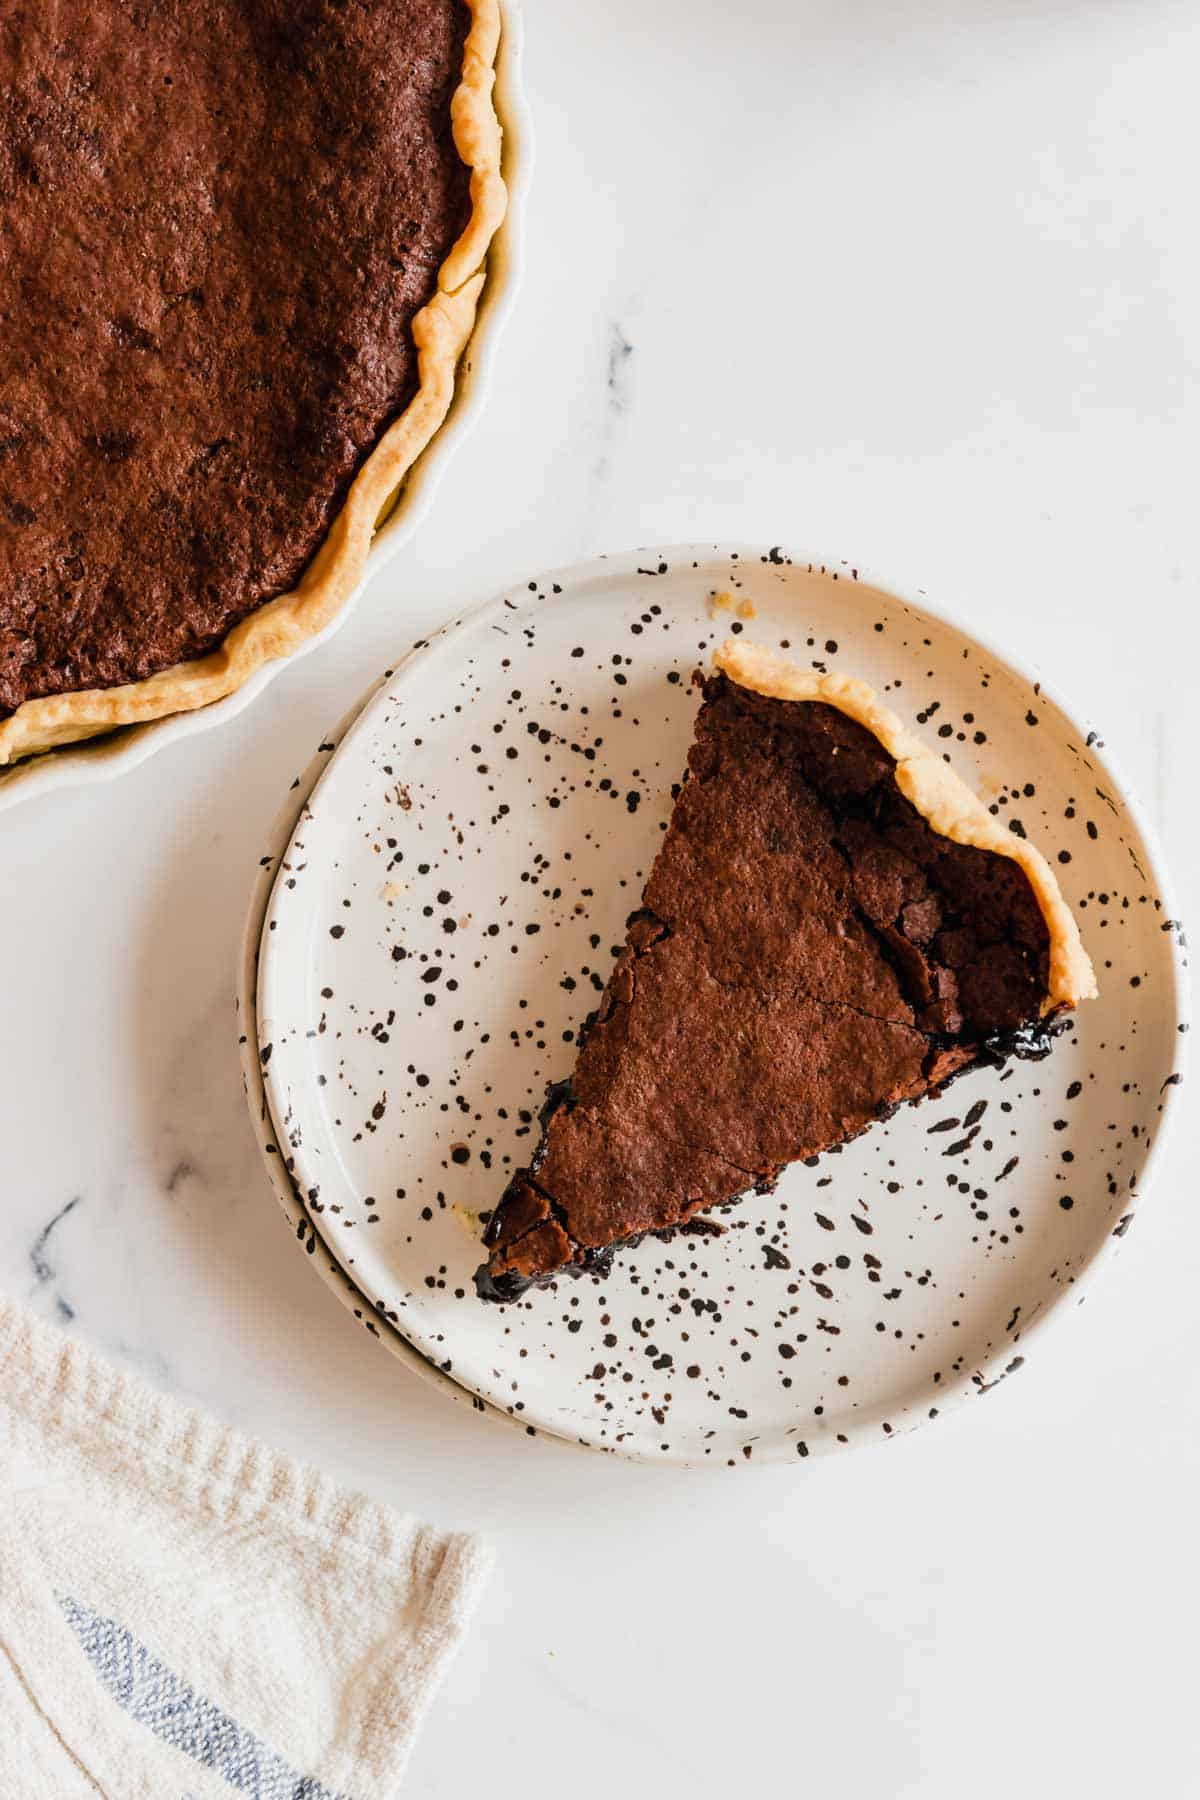 Looking down on a piece of chocolate pie on a speckled plate with the rest of the pie off in the corner.